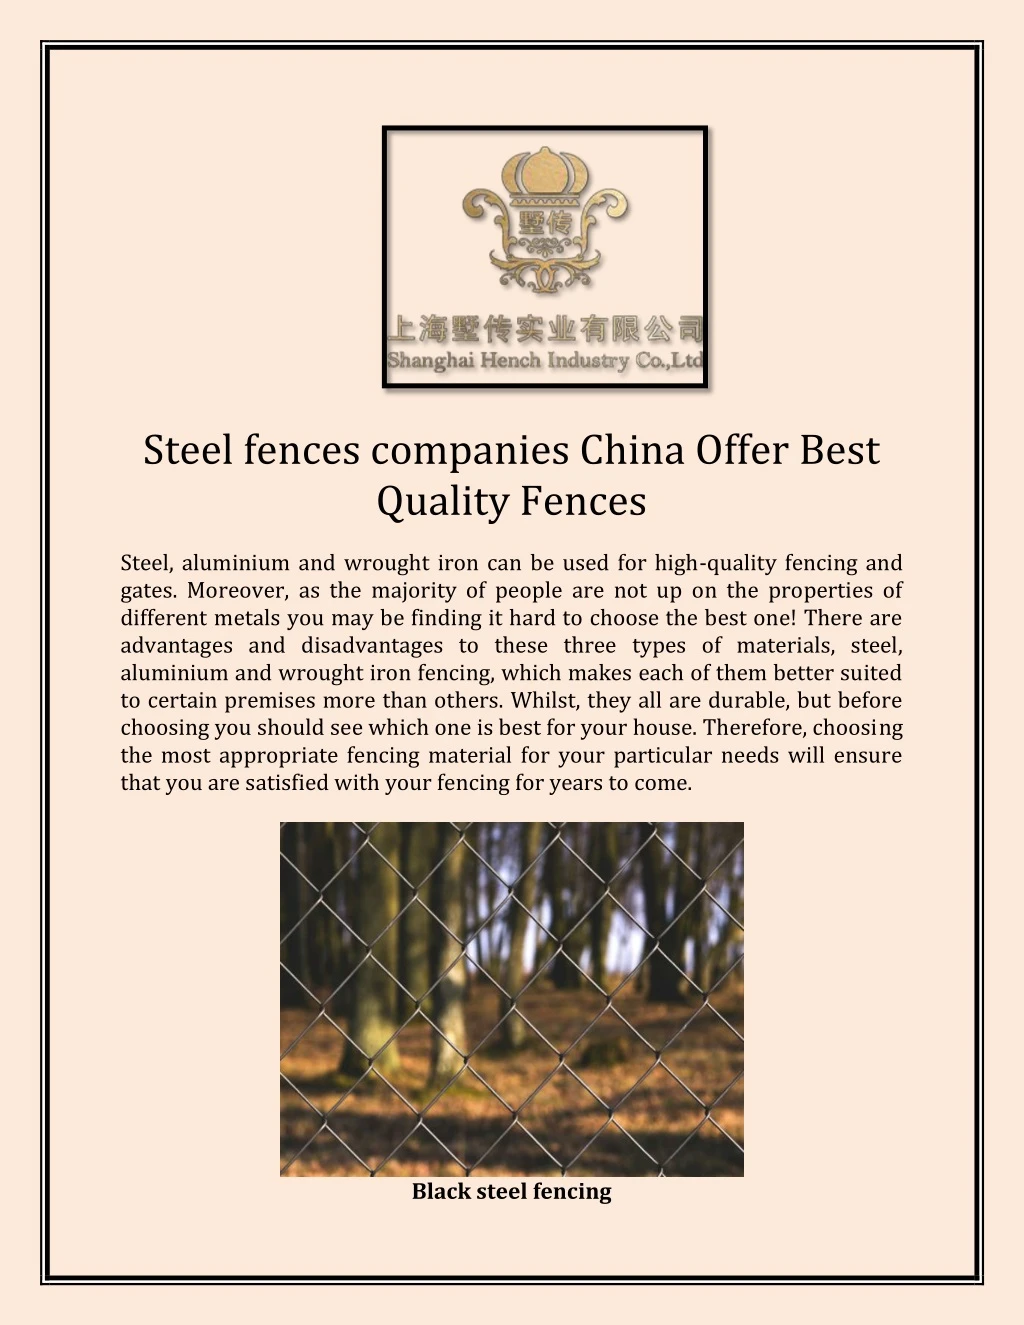 steel fences companies china offer best quality